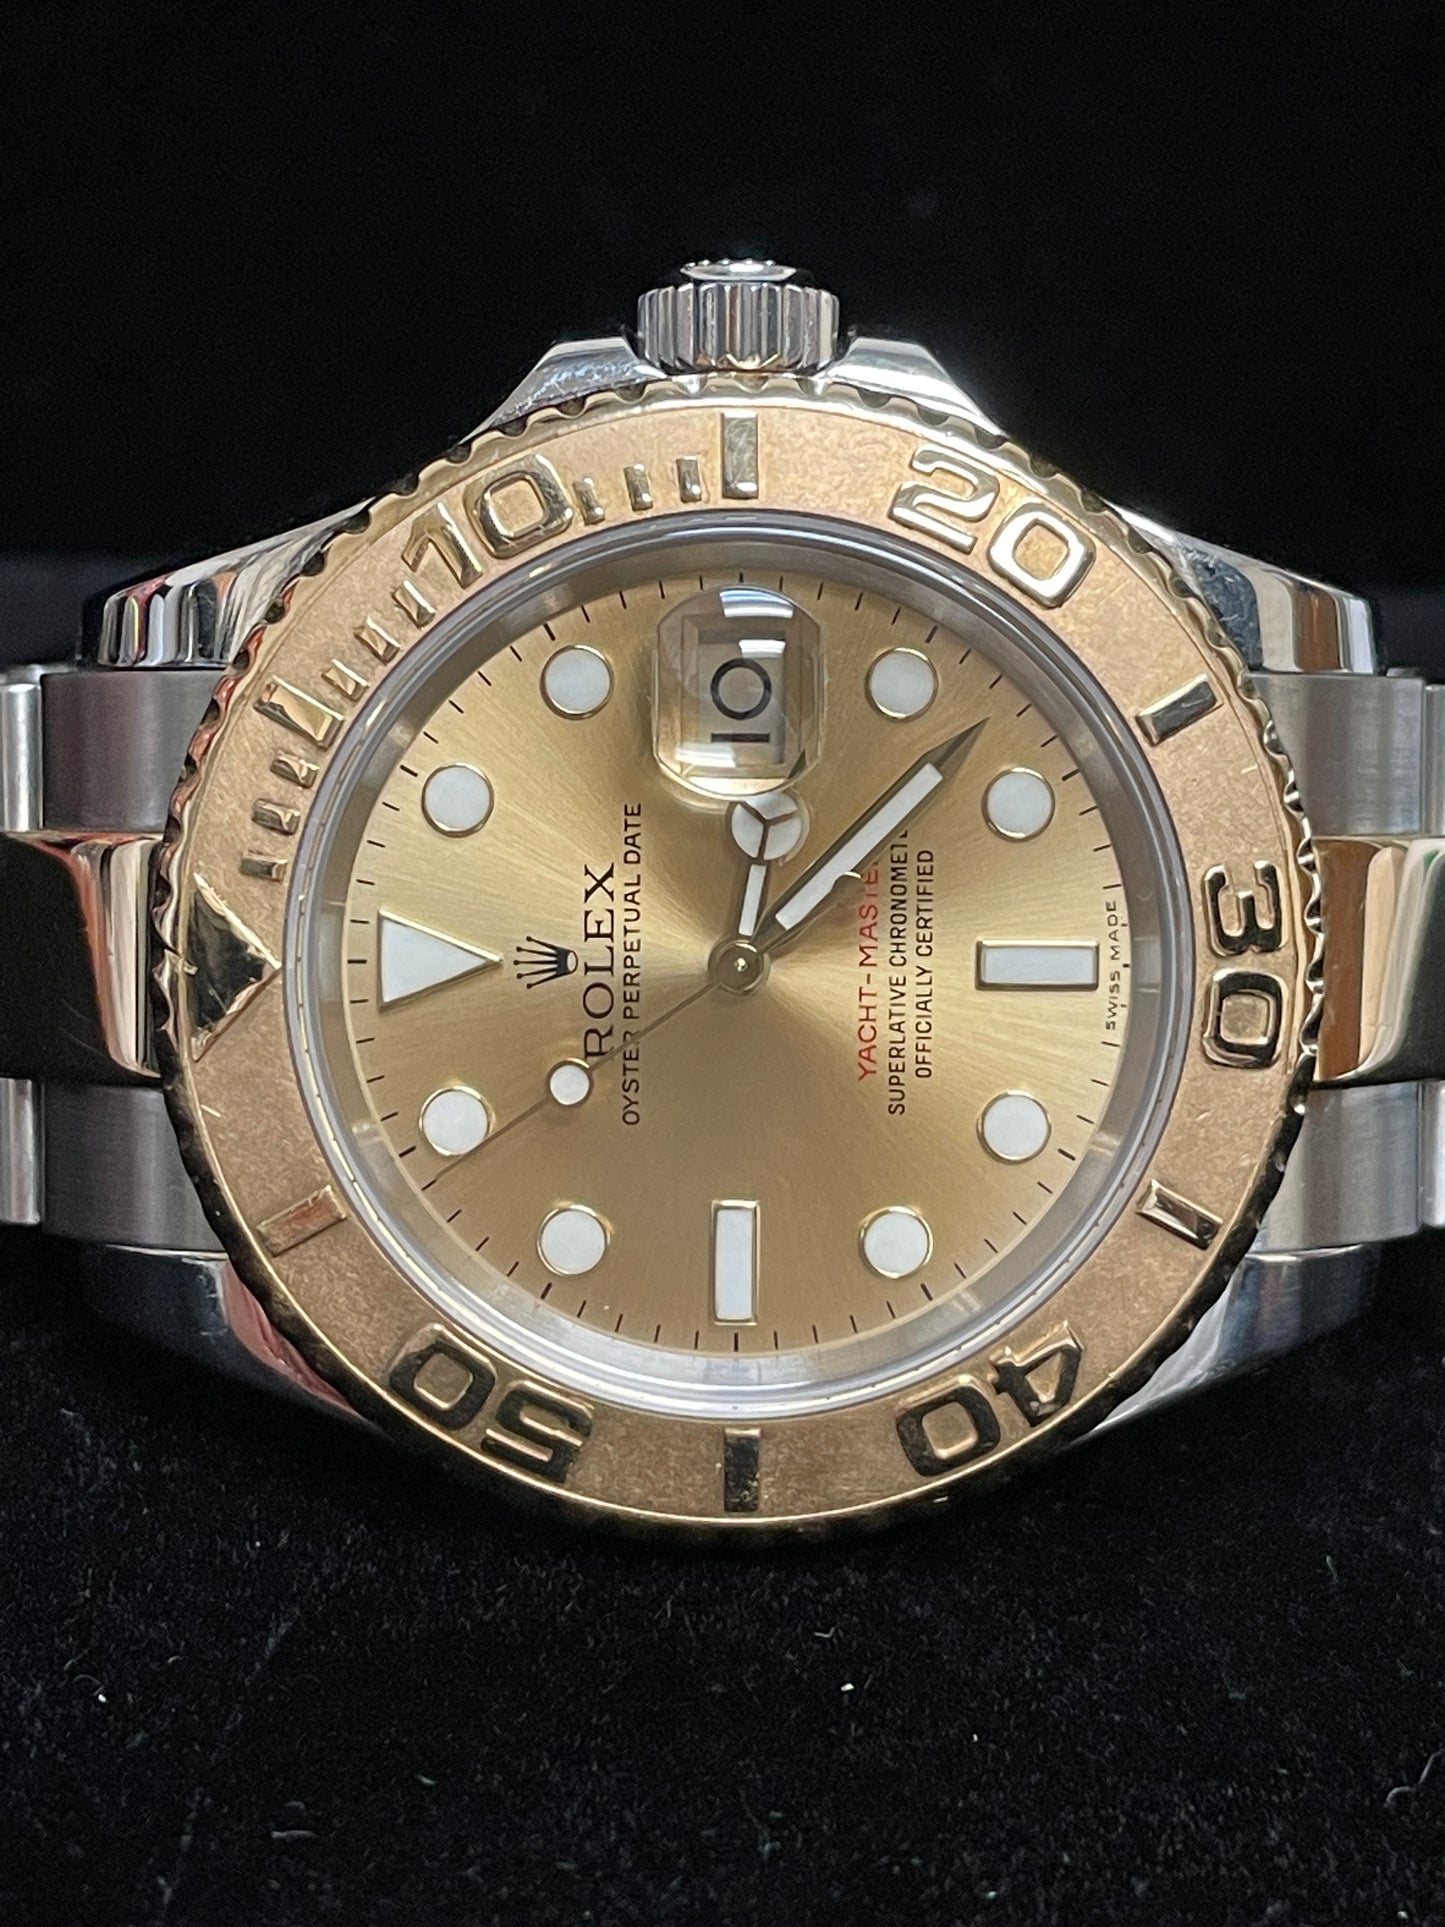 OH 2006 Rolex Yacht-Master 16623 Champagne Dial TT Oyster No Papers 40mm